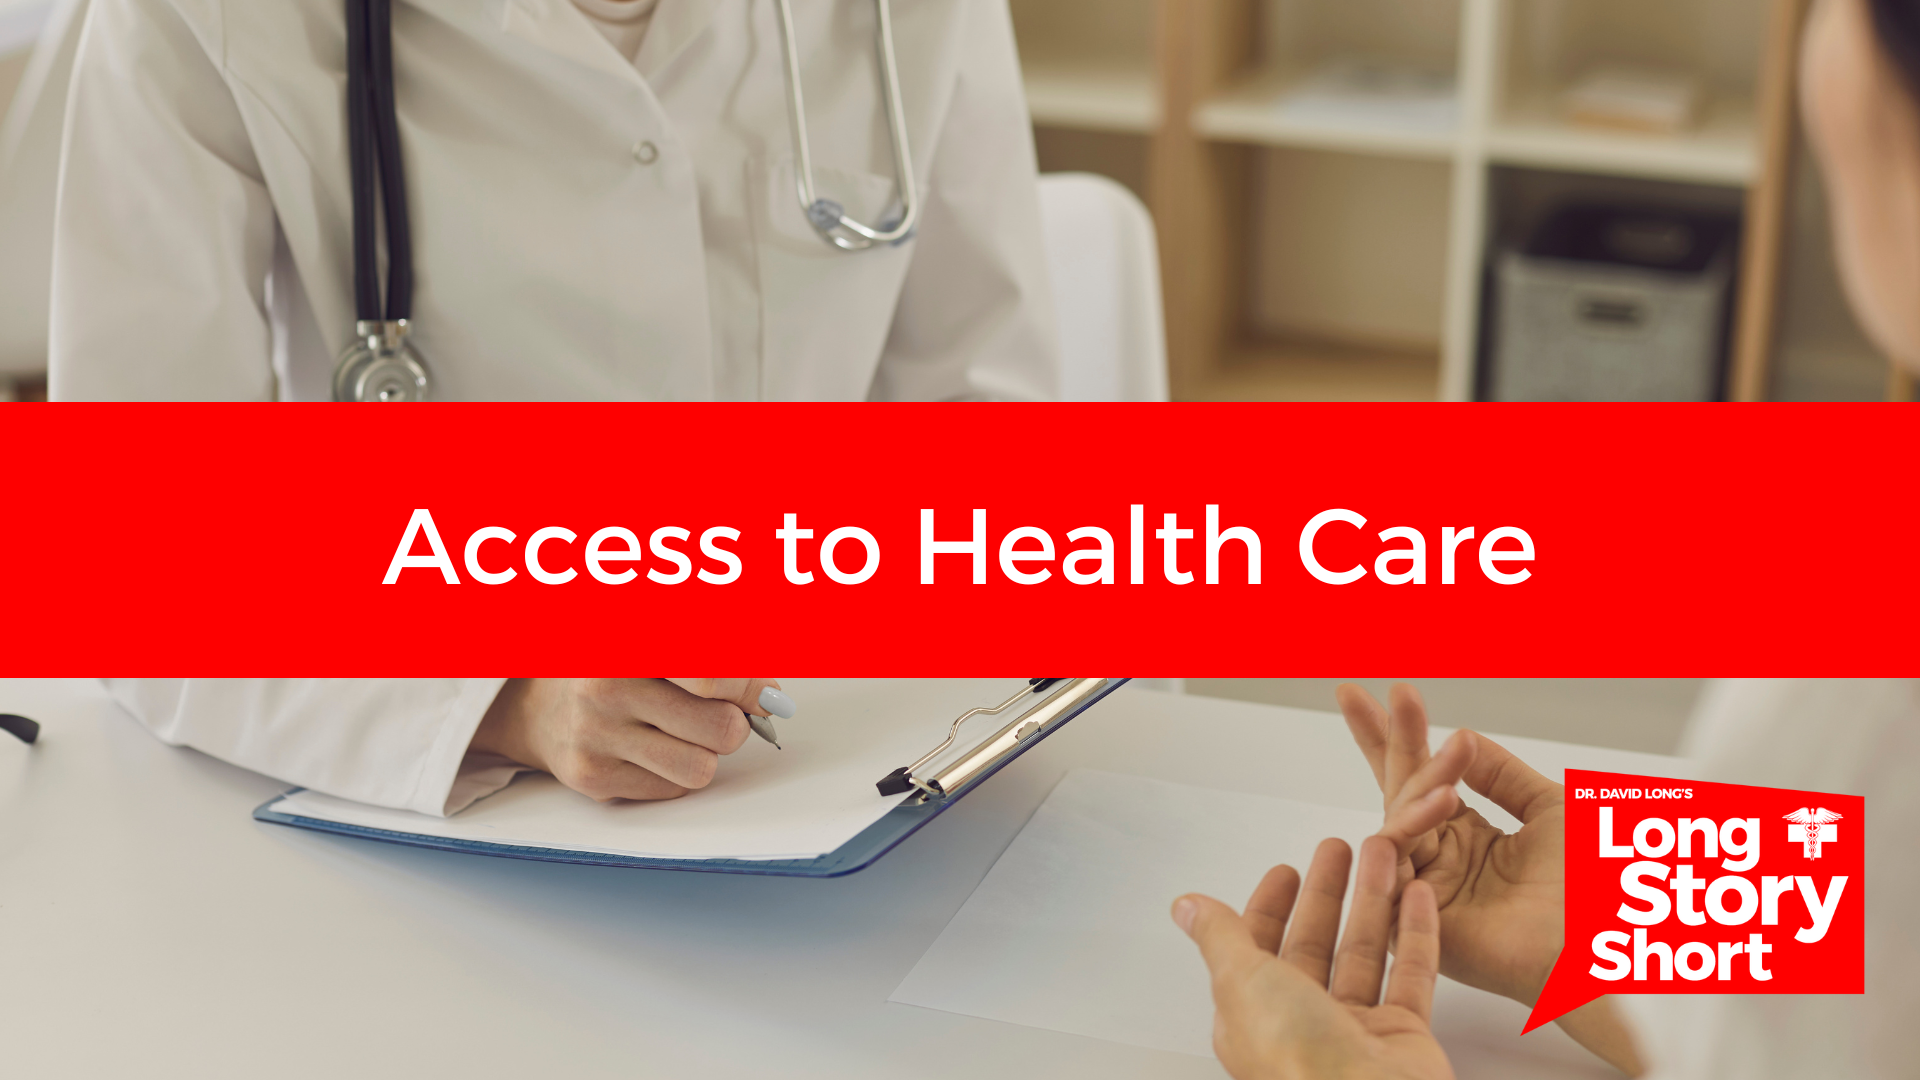 You are currently viewing Access to Healthcare – Dr. David Long